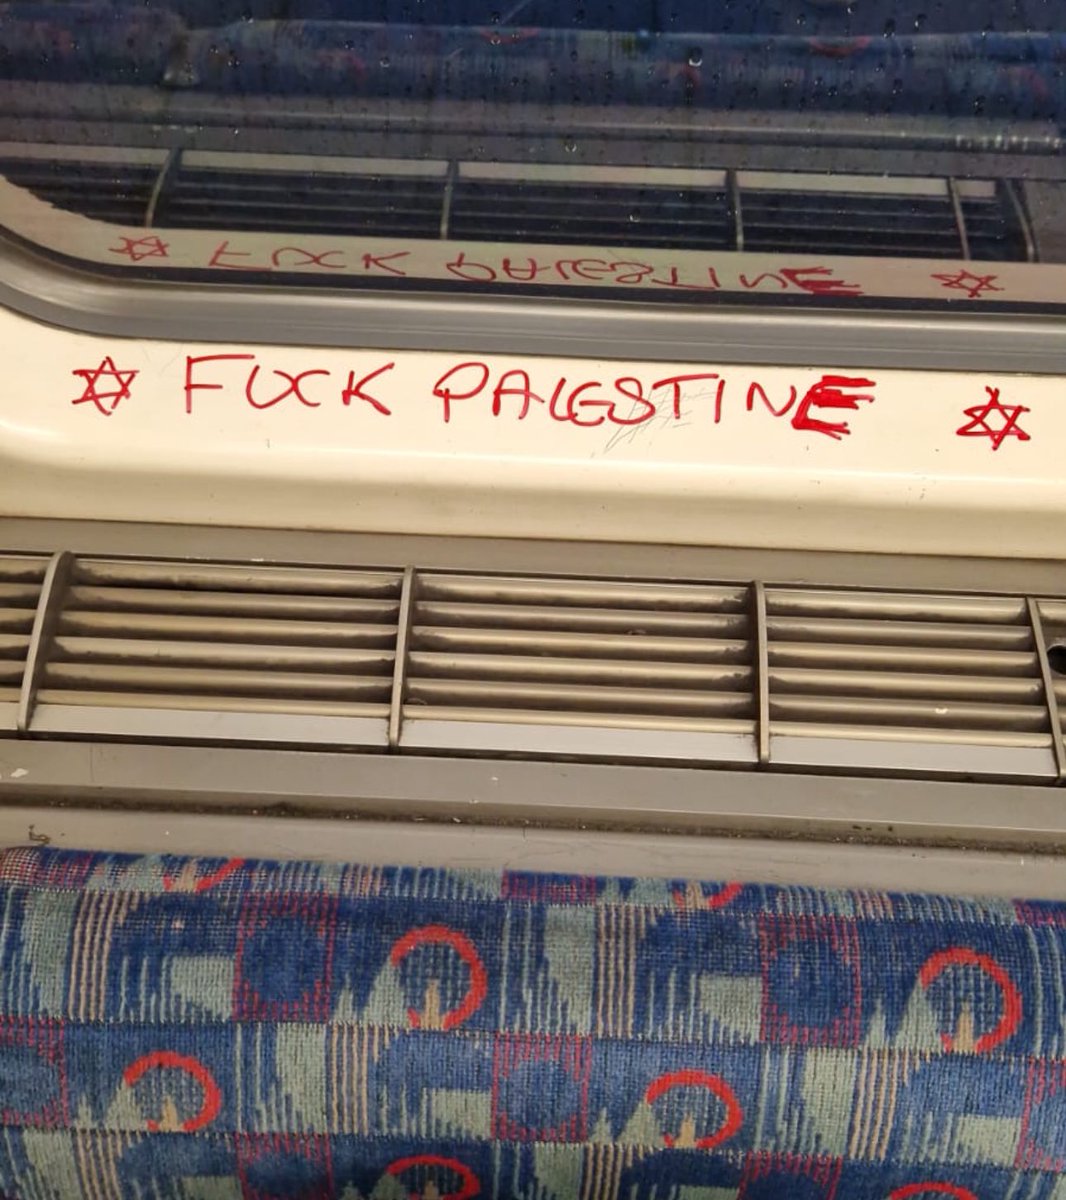 If we see racist graffiti like this on our tube trains, we take them out of service. We won't drive your hatred round London